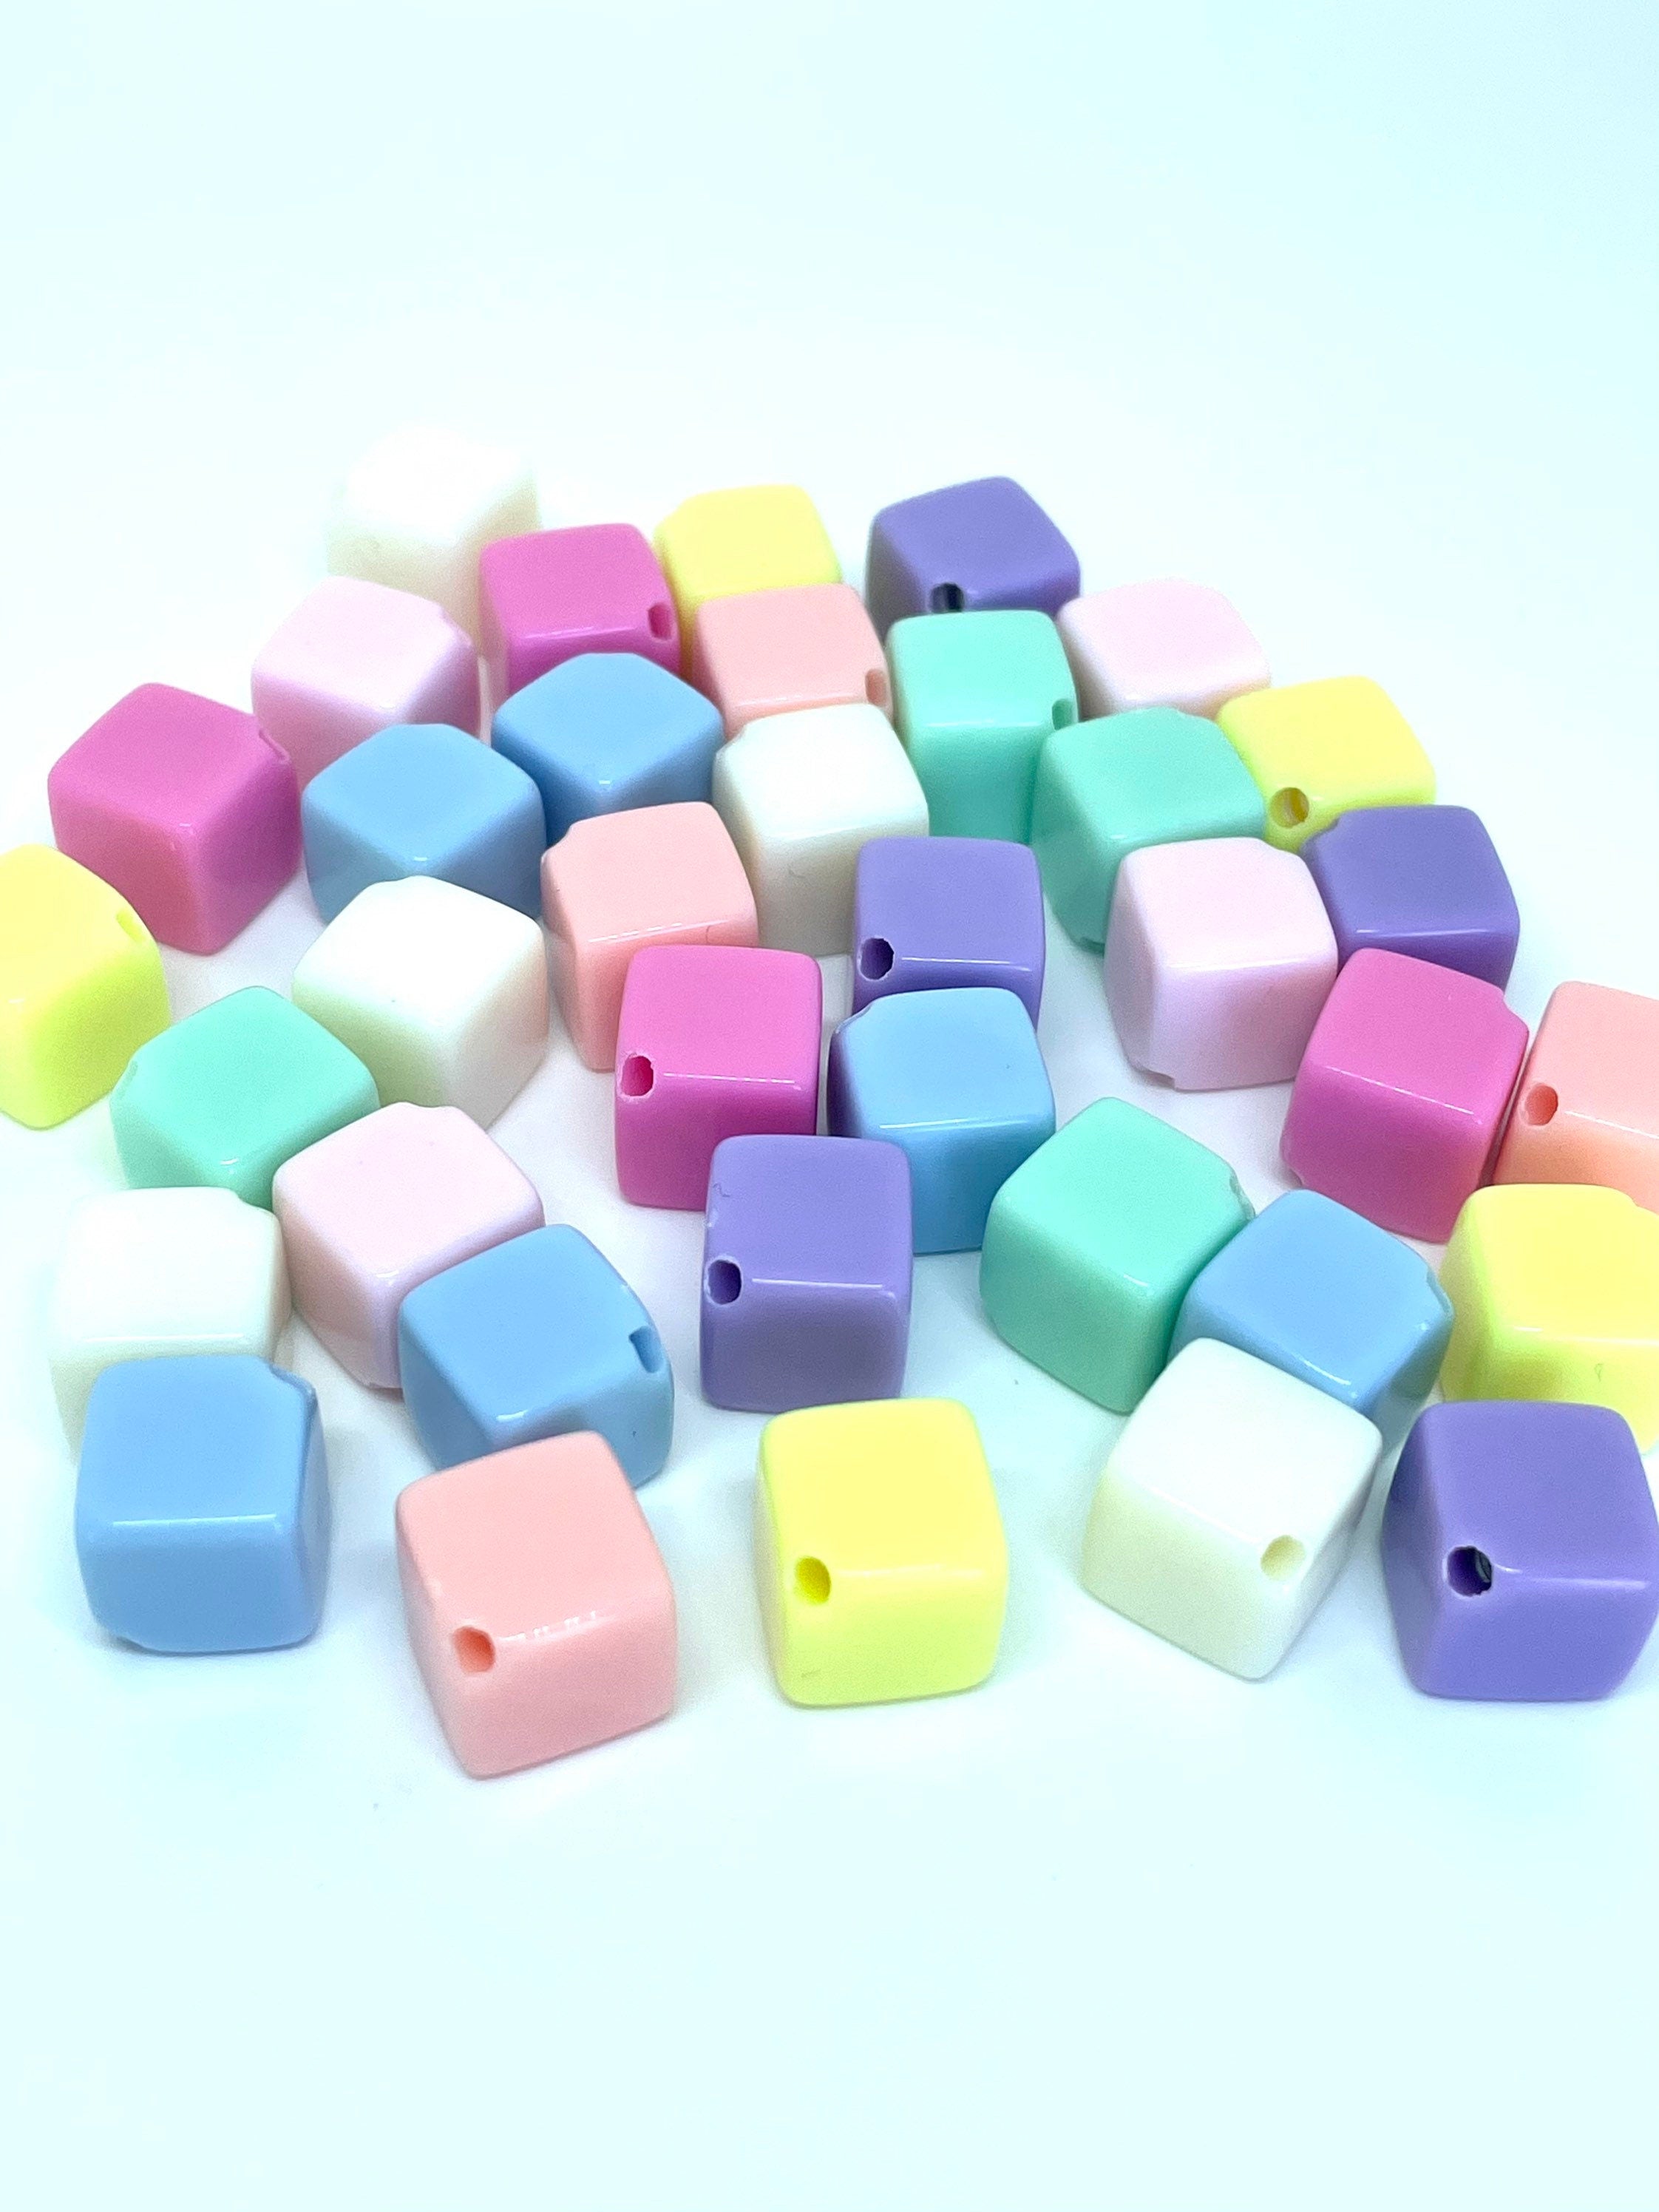 Kawaii Pastel Square Beads from Japan, Cute Beads, Kawaii Beads, DIY Jewelry, Japan Beads